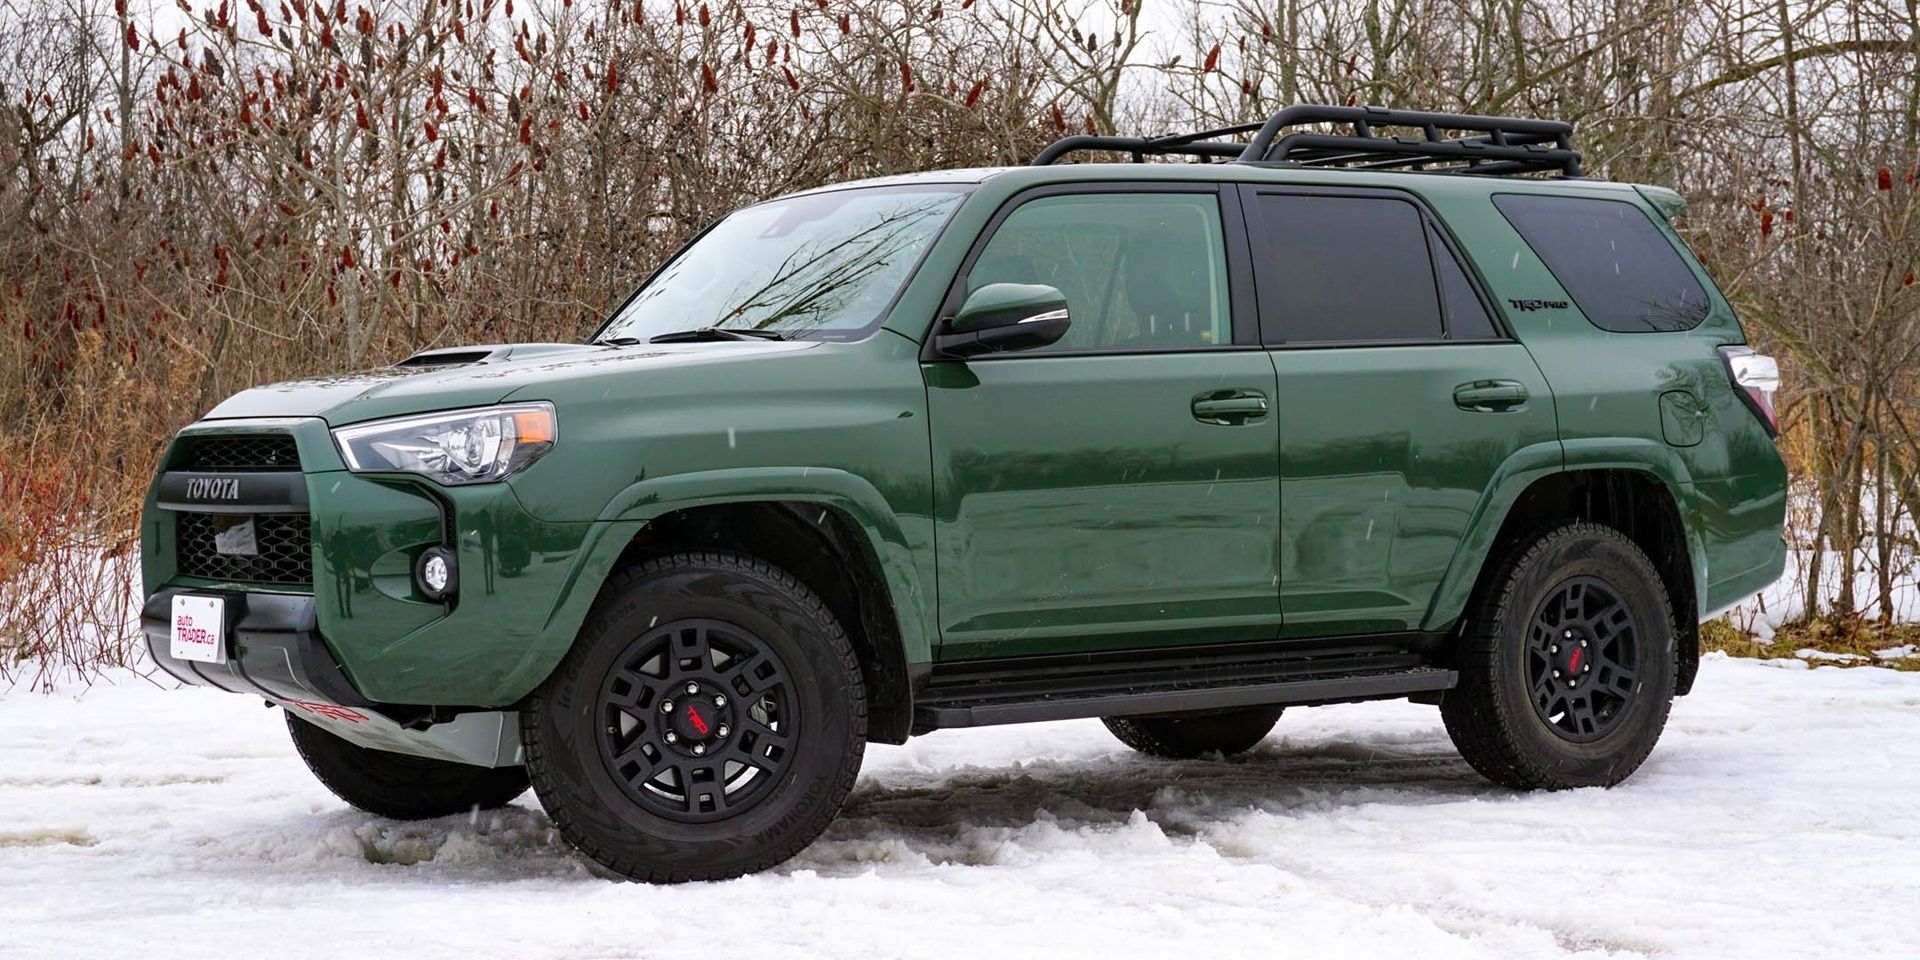 10 Reasons Why The Toyota 4Runner TRD Pro Is The Best Family Off-Roader